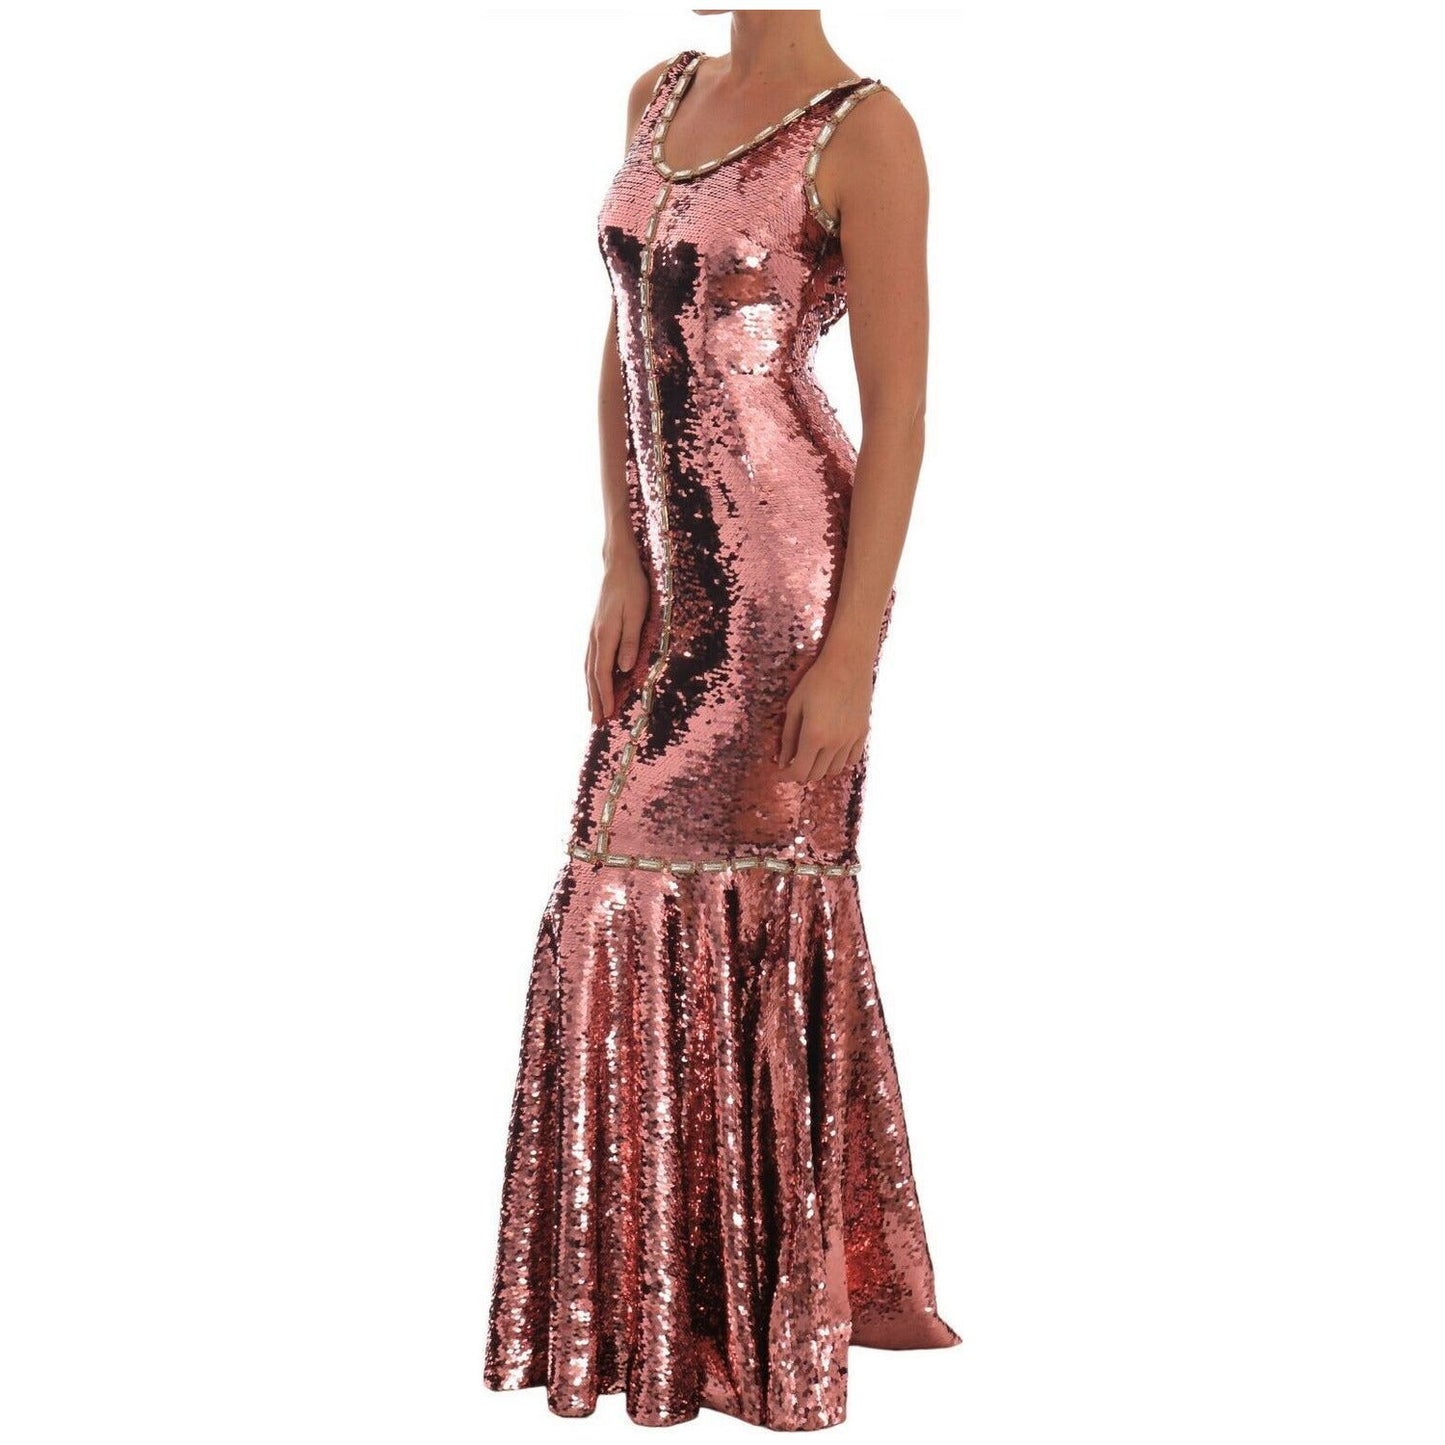 Dolce & Gabbana Enchanted Sicily Fairy Tale Sequined Gown WOMAN DRESSES pink-sequined-sheath-crystal-dress-gown